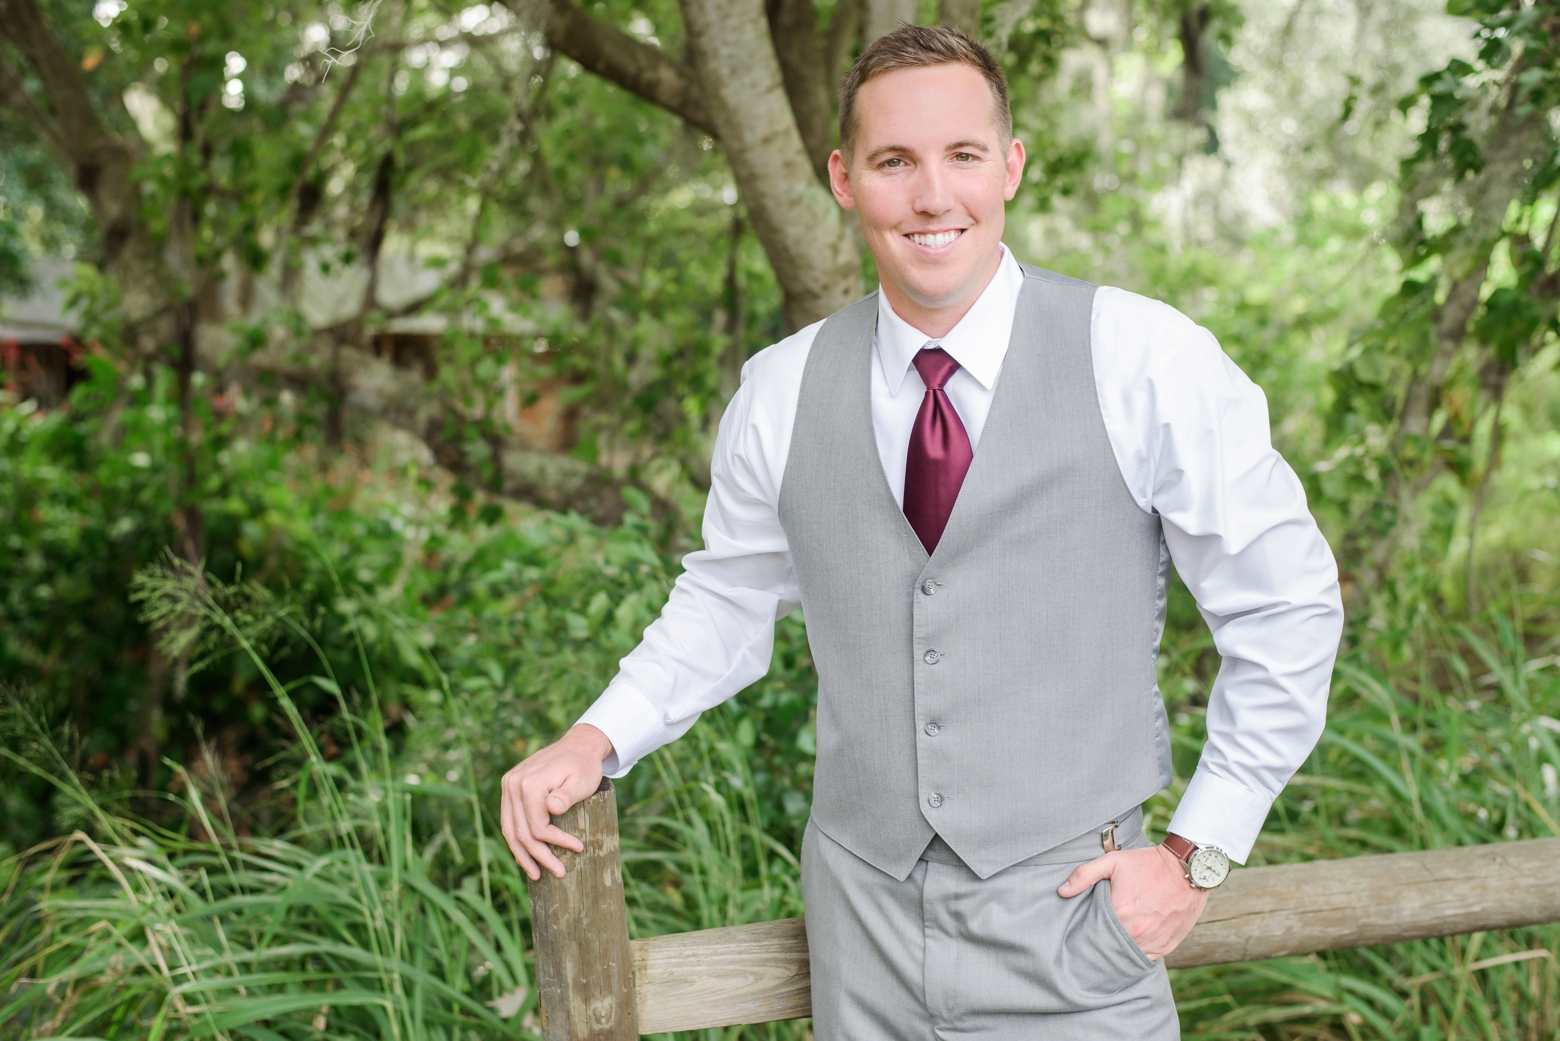 The Groom poses against a simple fence before his Cross Creek Ranch Wedding day in Rural, FL